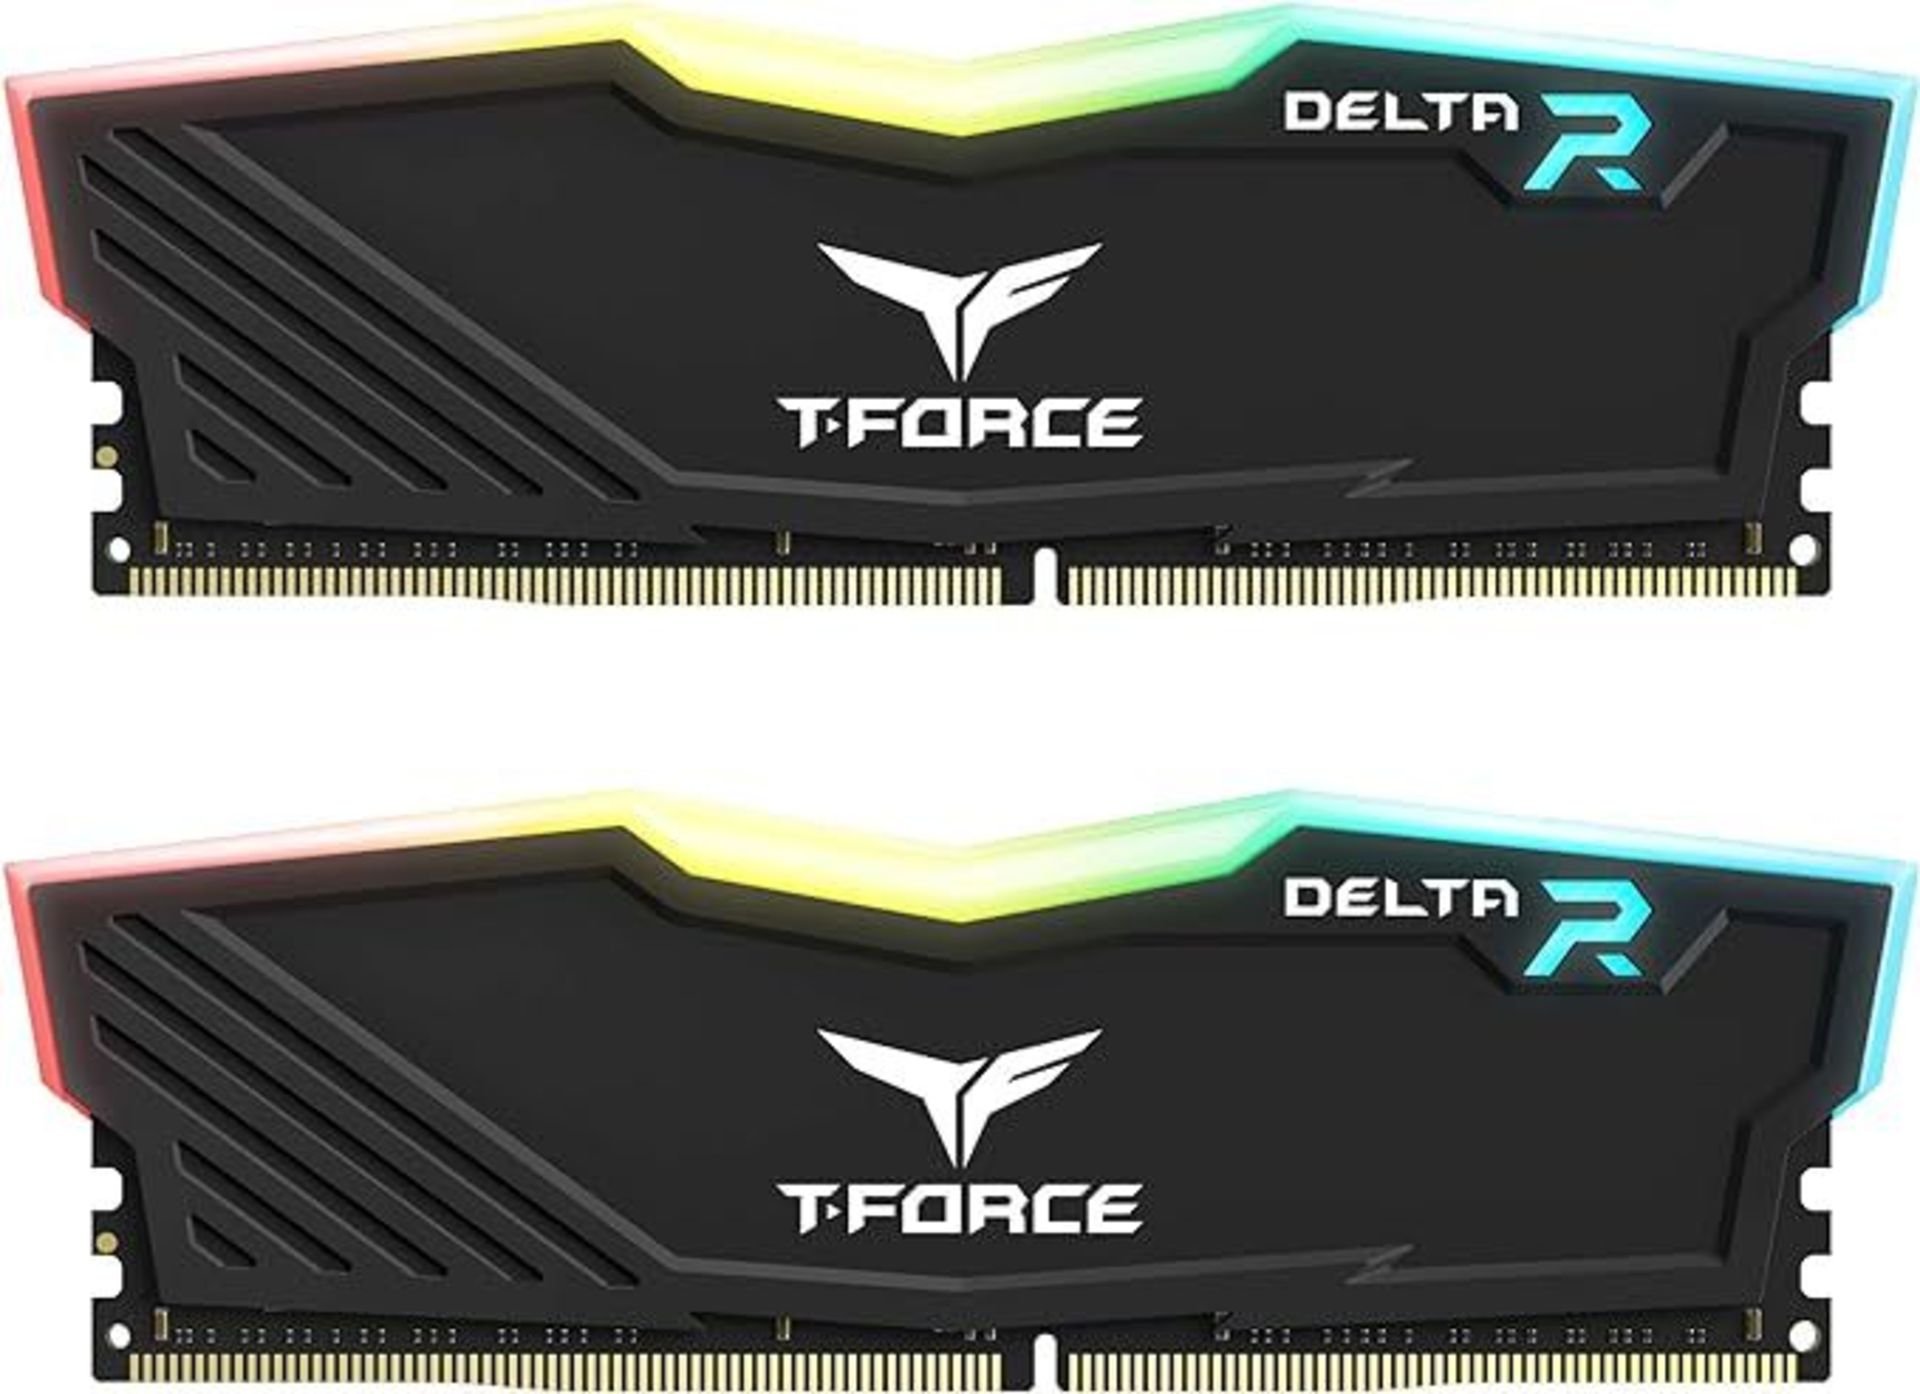 TEAMGROUP T-Force Delta RGB DDR4 64GB (2x32GB) 3200MHz (PC4-28800) CL16 Desktop Gaming Memory Module